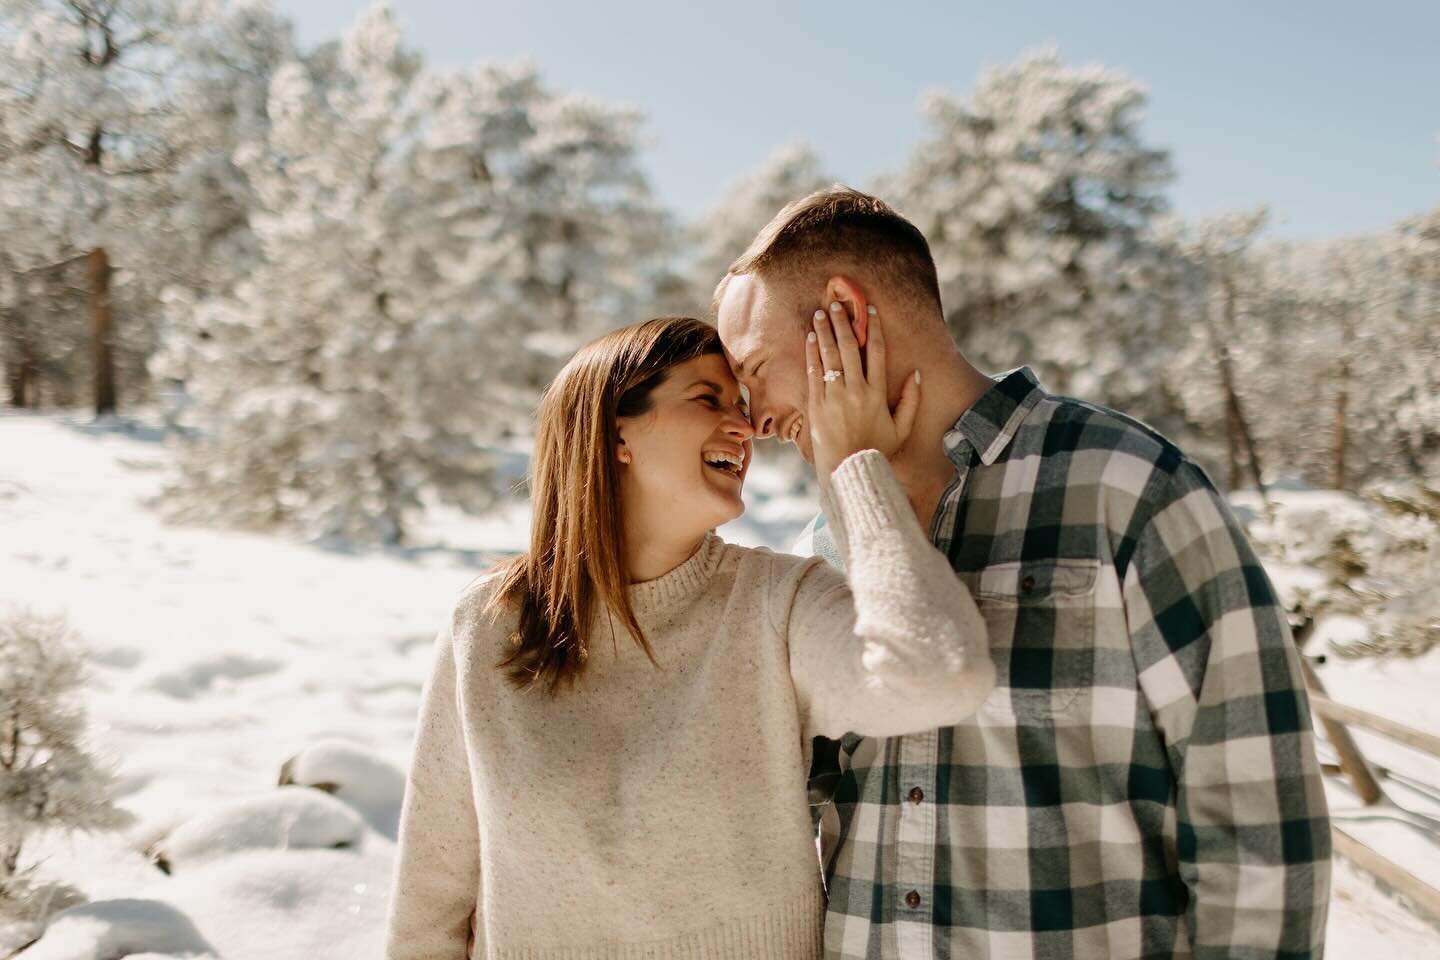 Nothing like a blanket of fresh snow for a winter surprise proposal! 💍❄️ I love snow filled days like today! Congratulations to Meredith and Josiah! Scroll to the end to see the actual proposal!